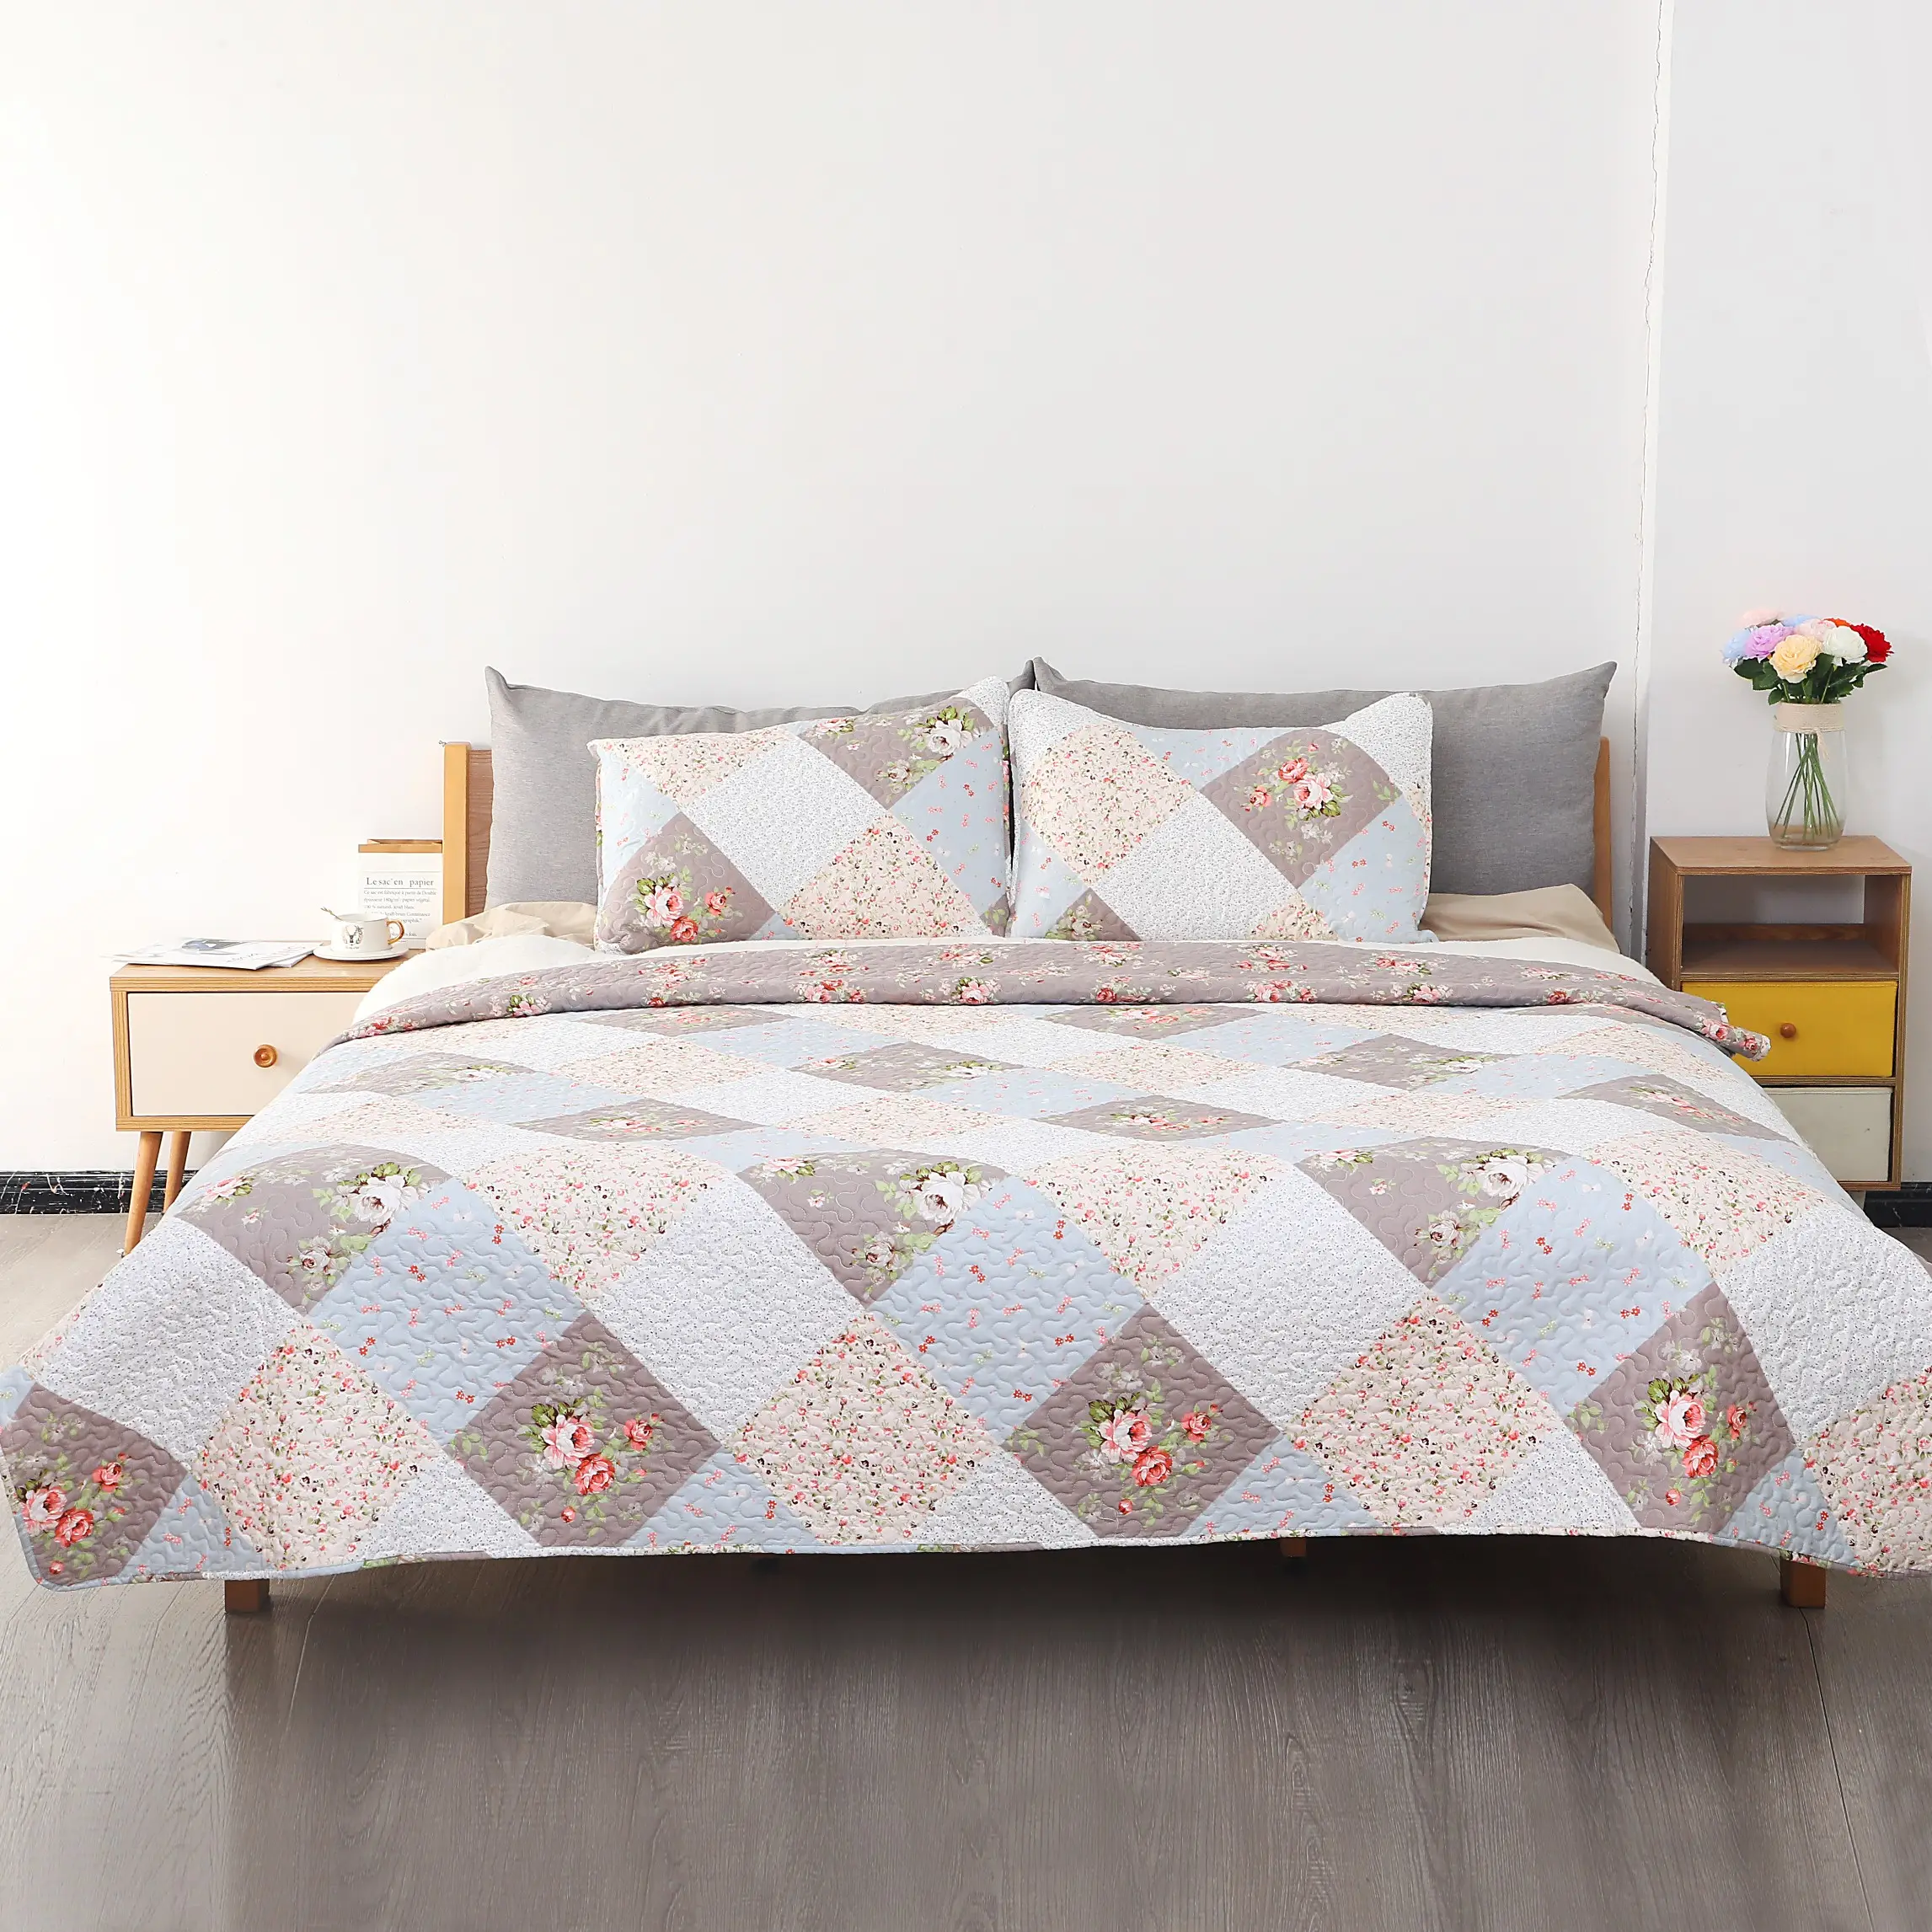 100% polyester Bedspread set Three pieces set bedding printing style quilted set